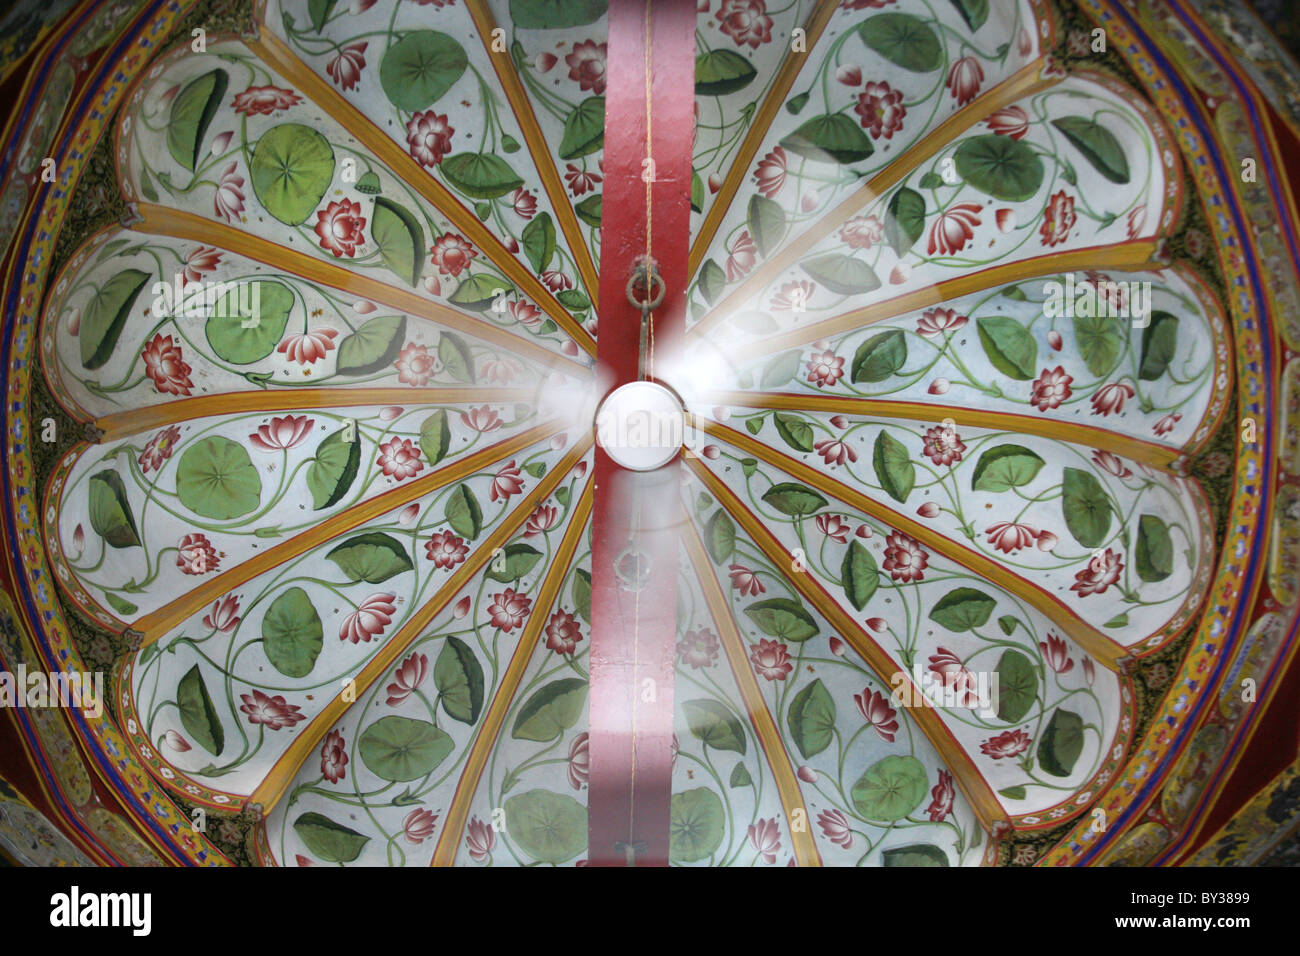 Lily flower design ceiling fan City Palace, Udaipur, Rajasthan Stock Photo